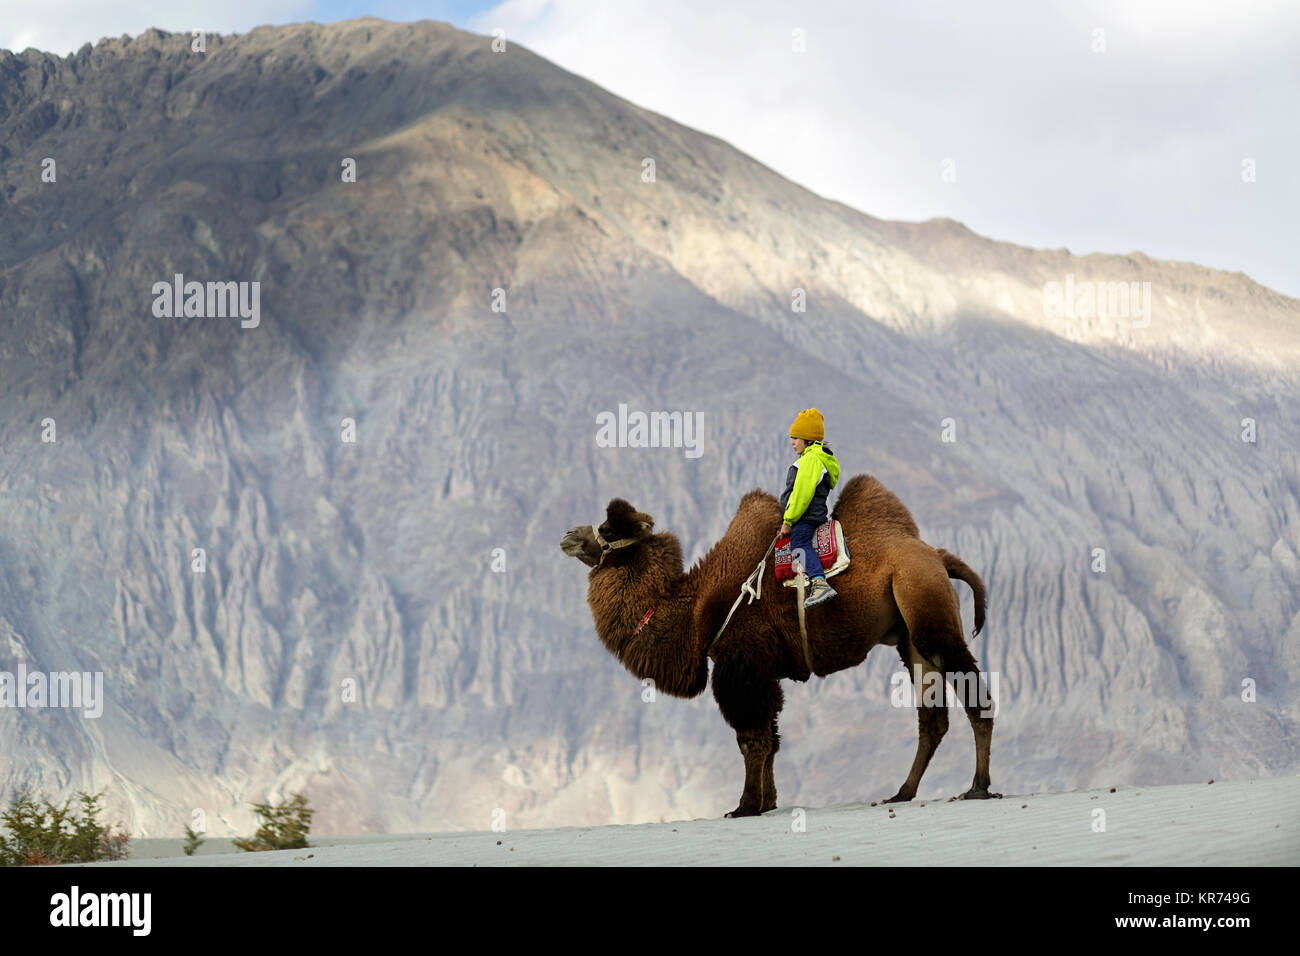 Young western boy riding double hump camel and crossing the desert in the Nubra valley, Ladakh, Jammu and Kashmir, India Stock Photo